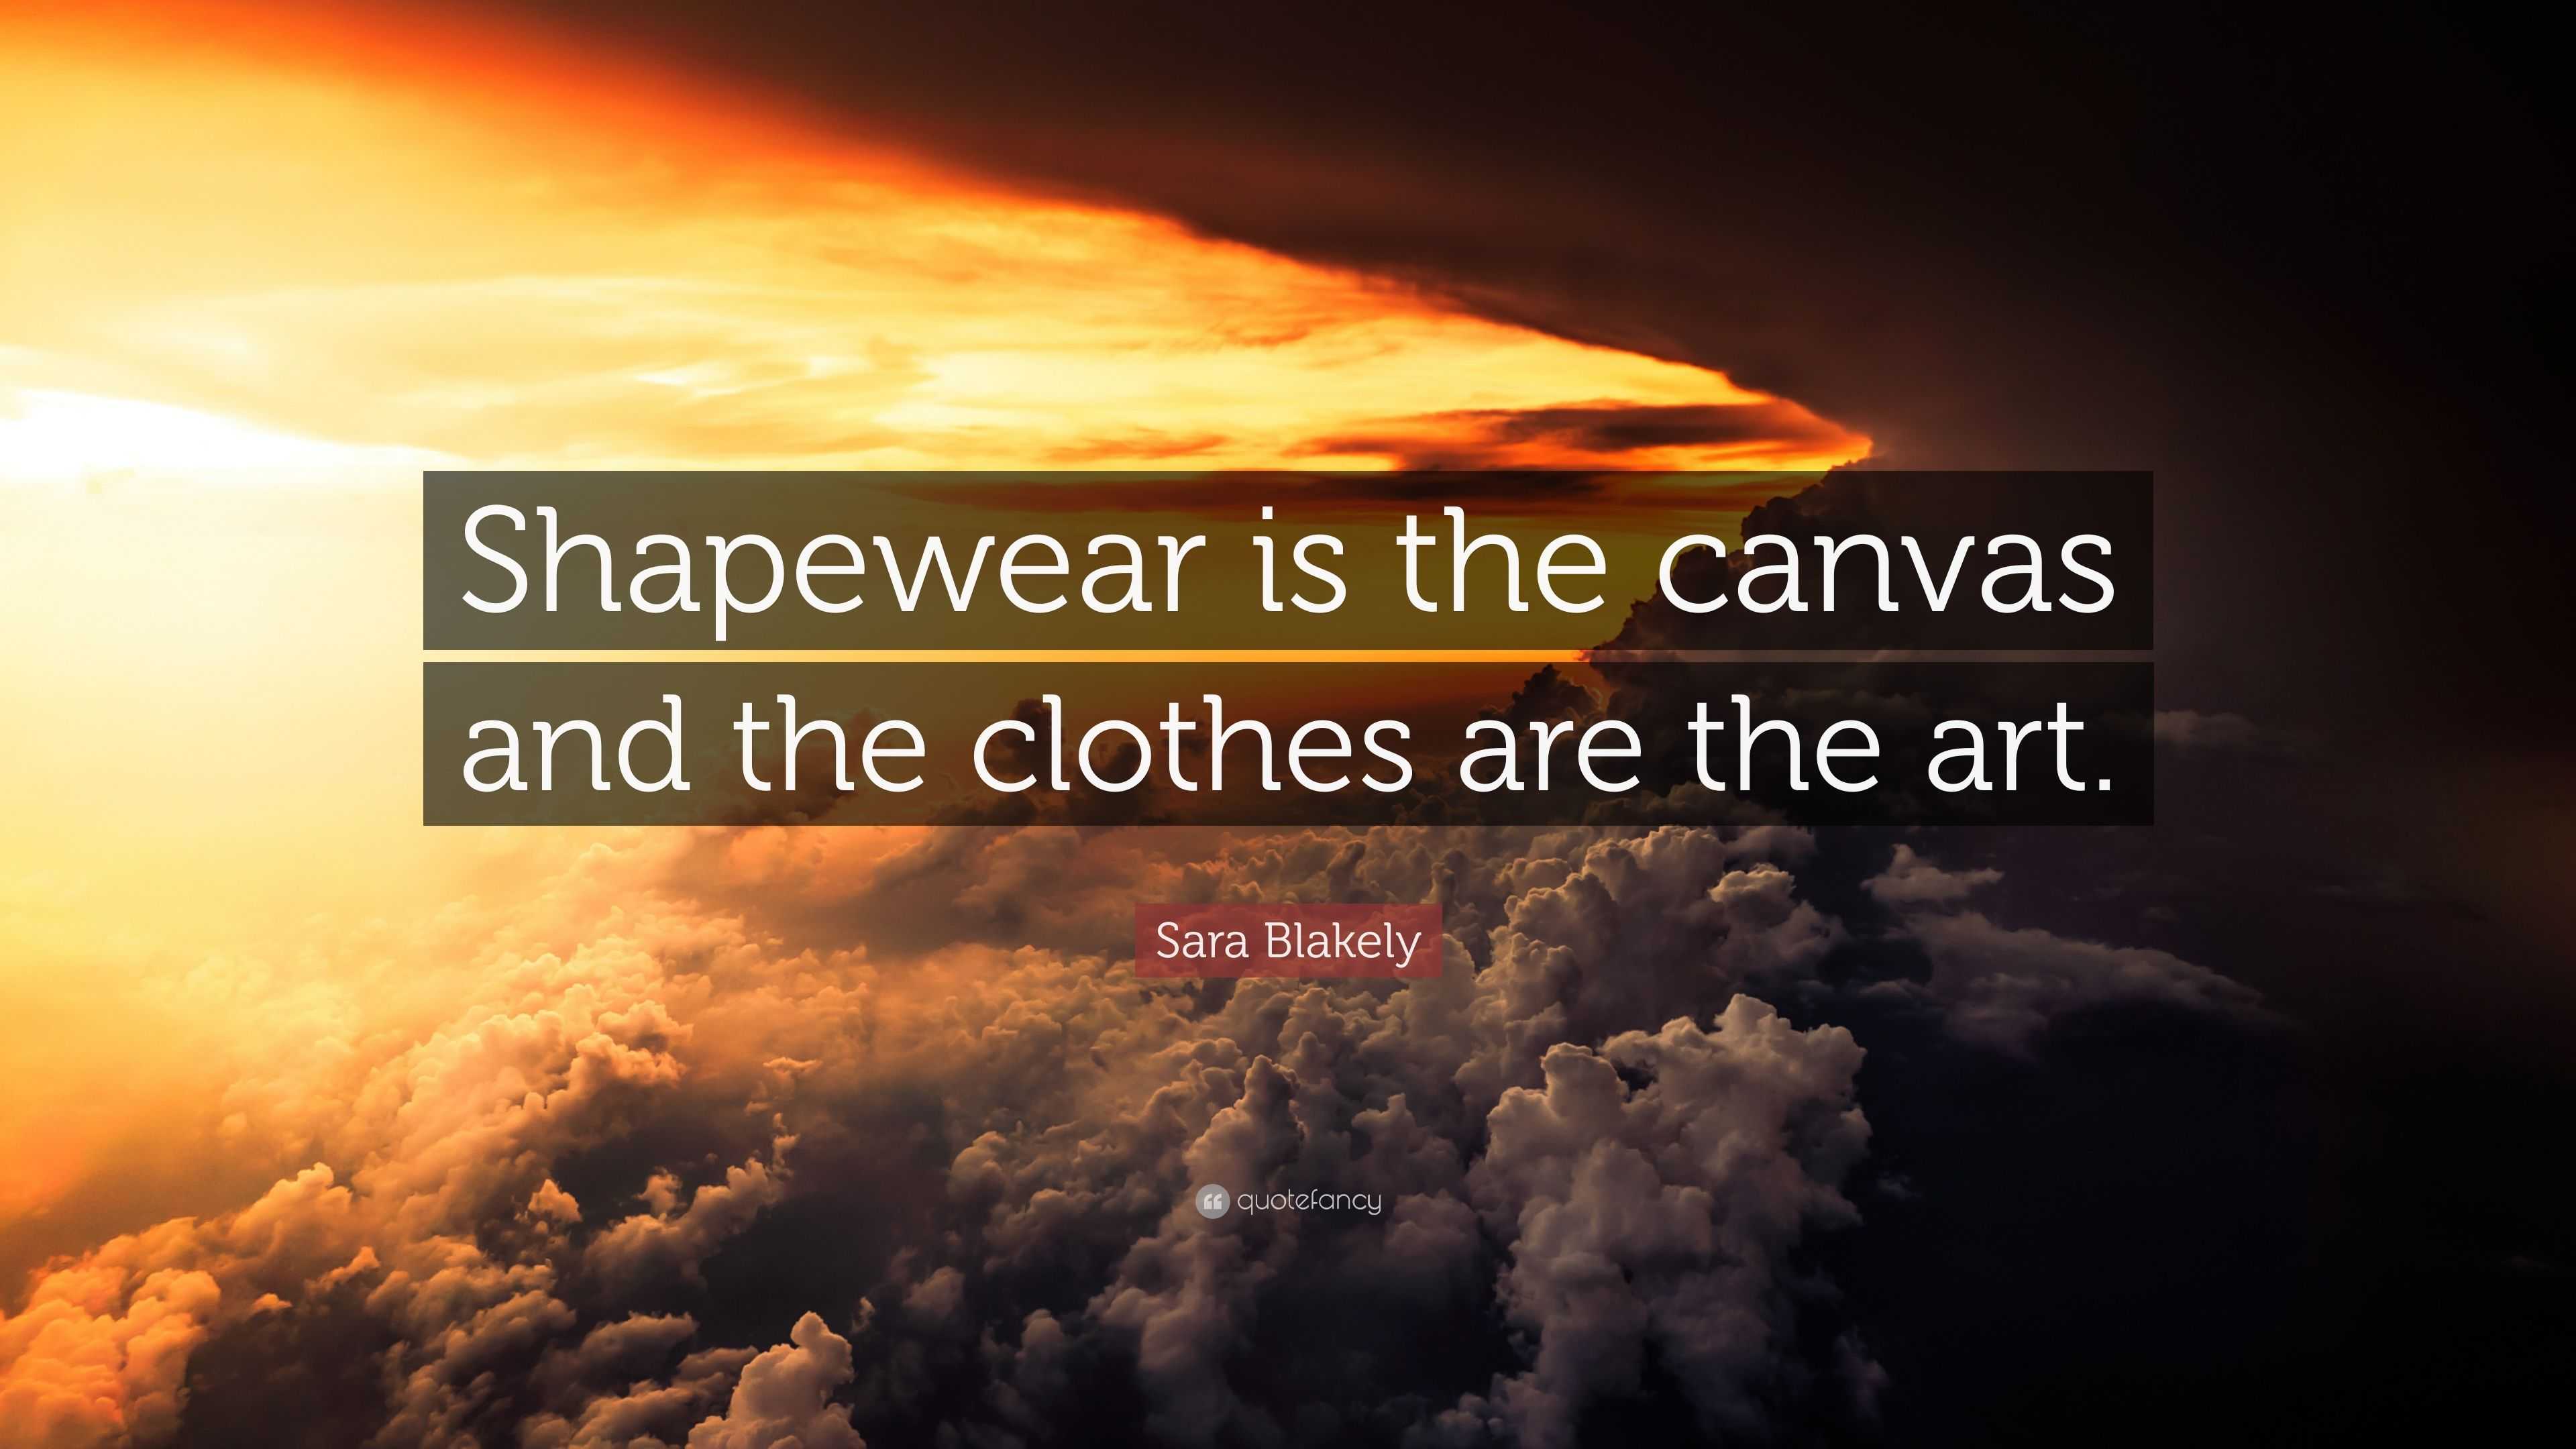 Sara Blakely quote: Shapewear is the canvas and the clothes are the art.